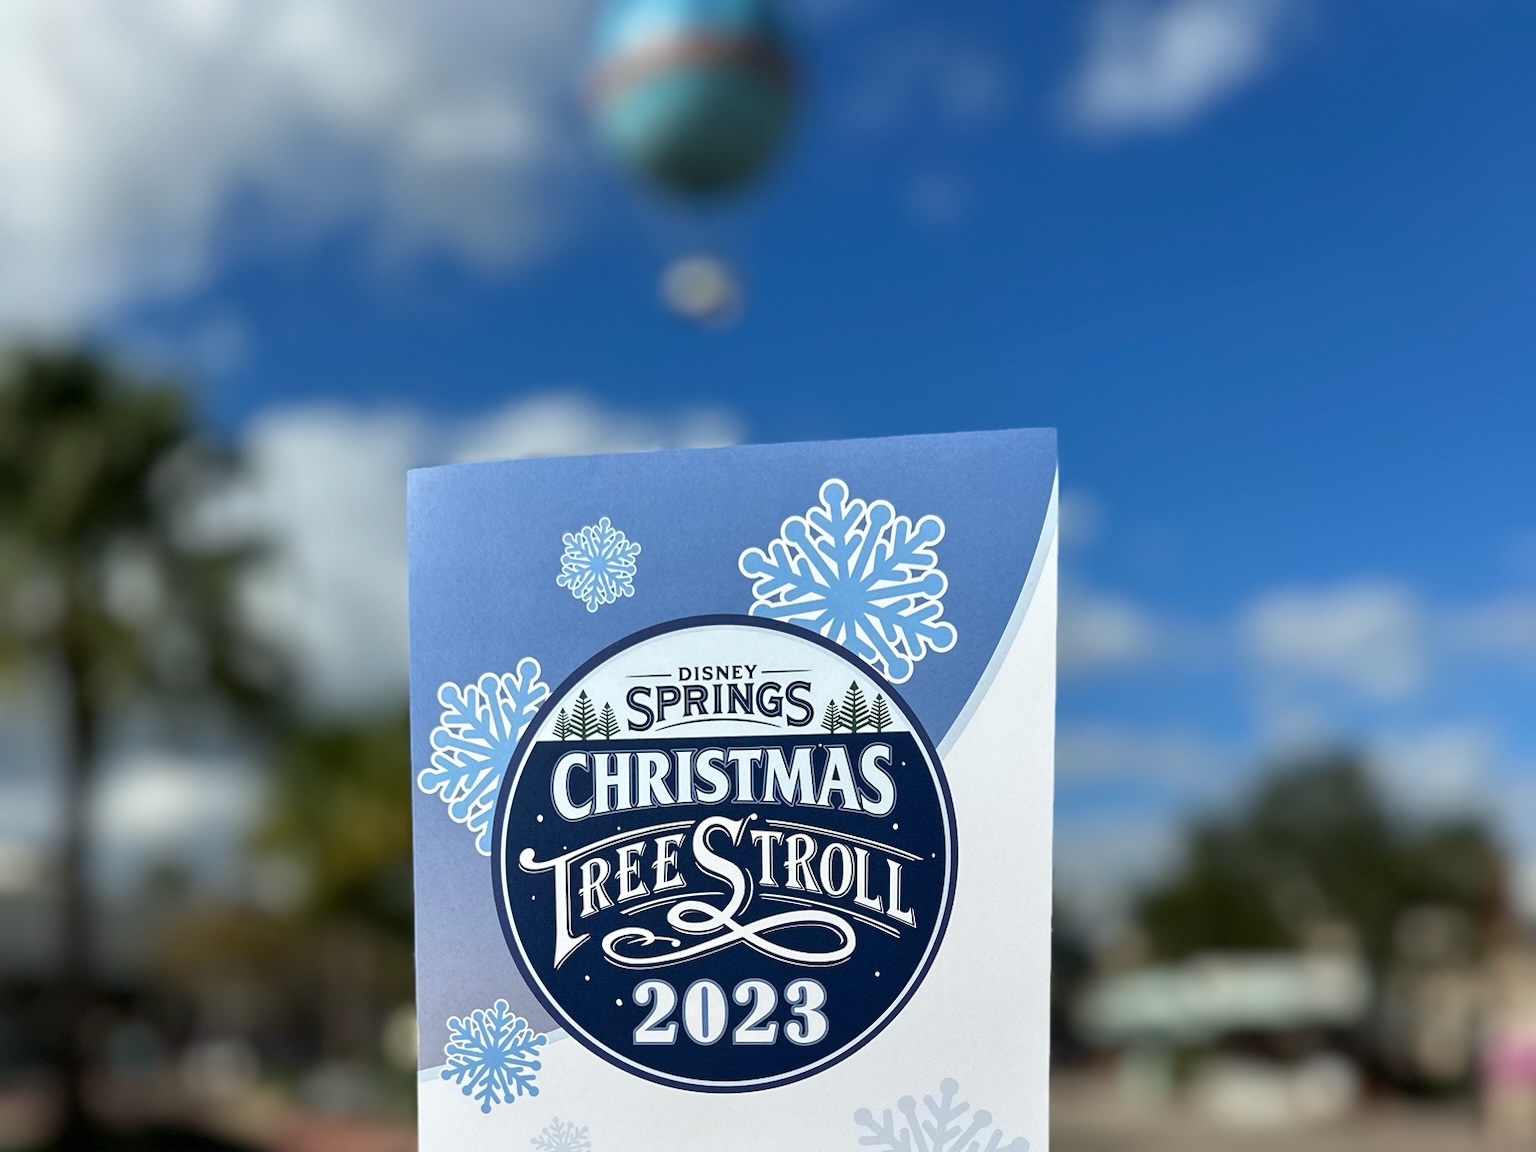 Christmas Tree Stroll 2023 At Disney Springs Overview & Tree Photos